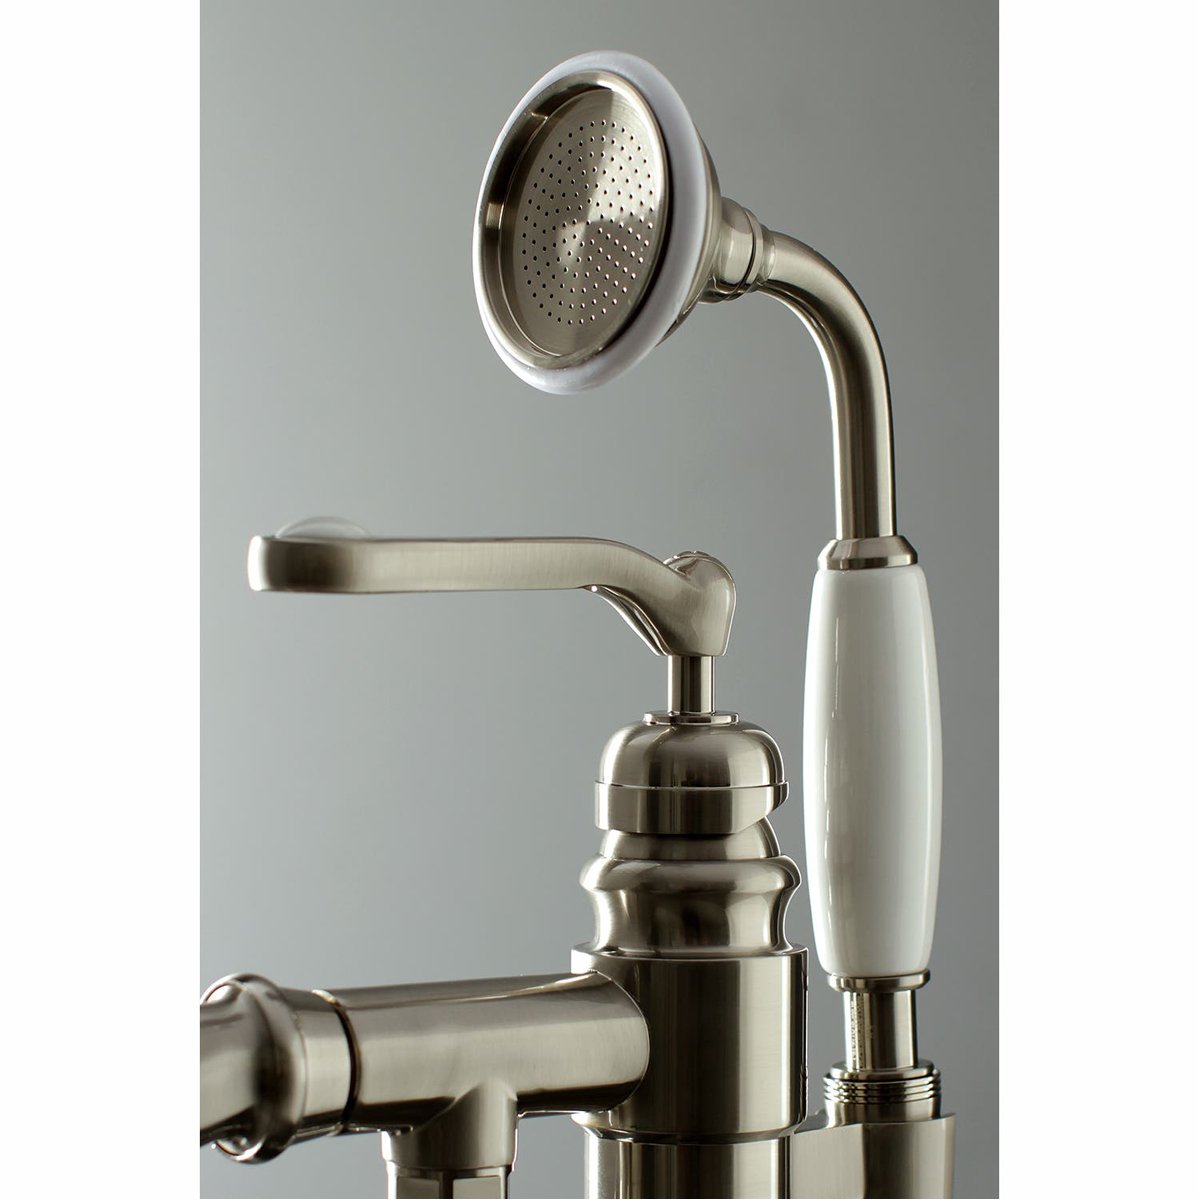 Kingston Brass Royale Single Handle Freestanding Roman Tub Faucet with Hand Shower